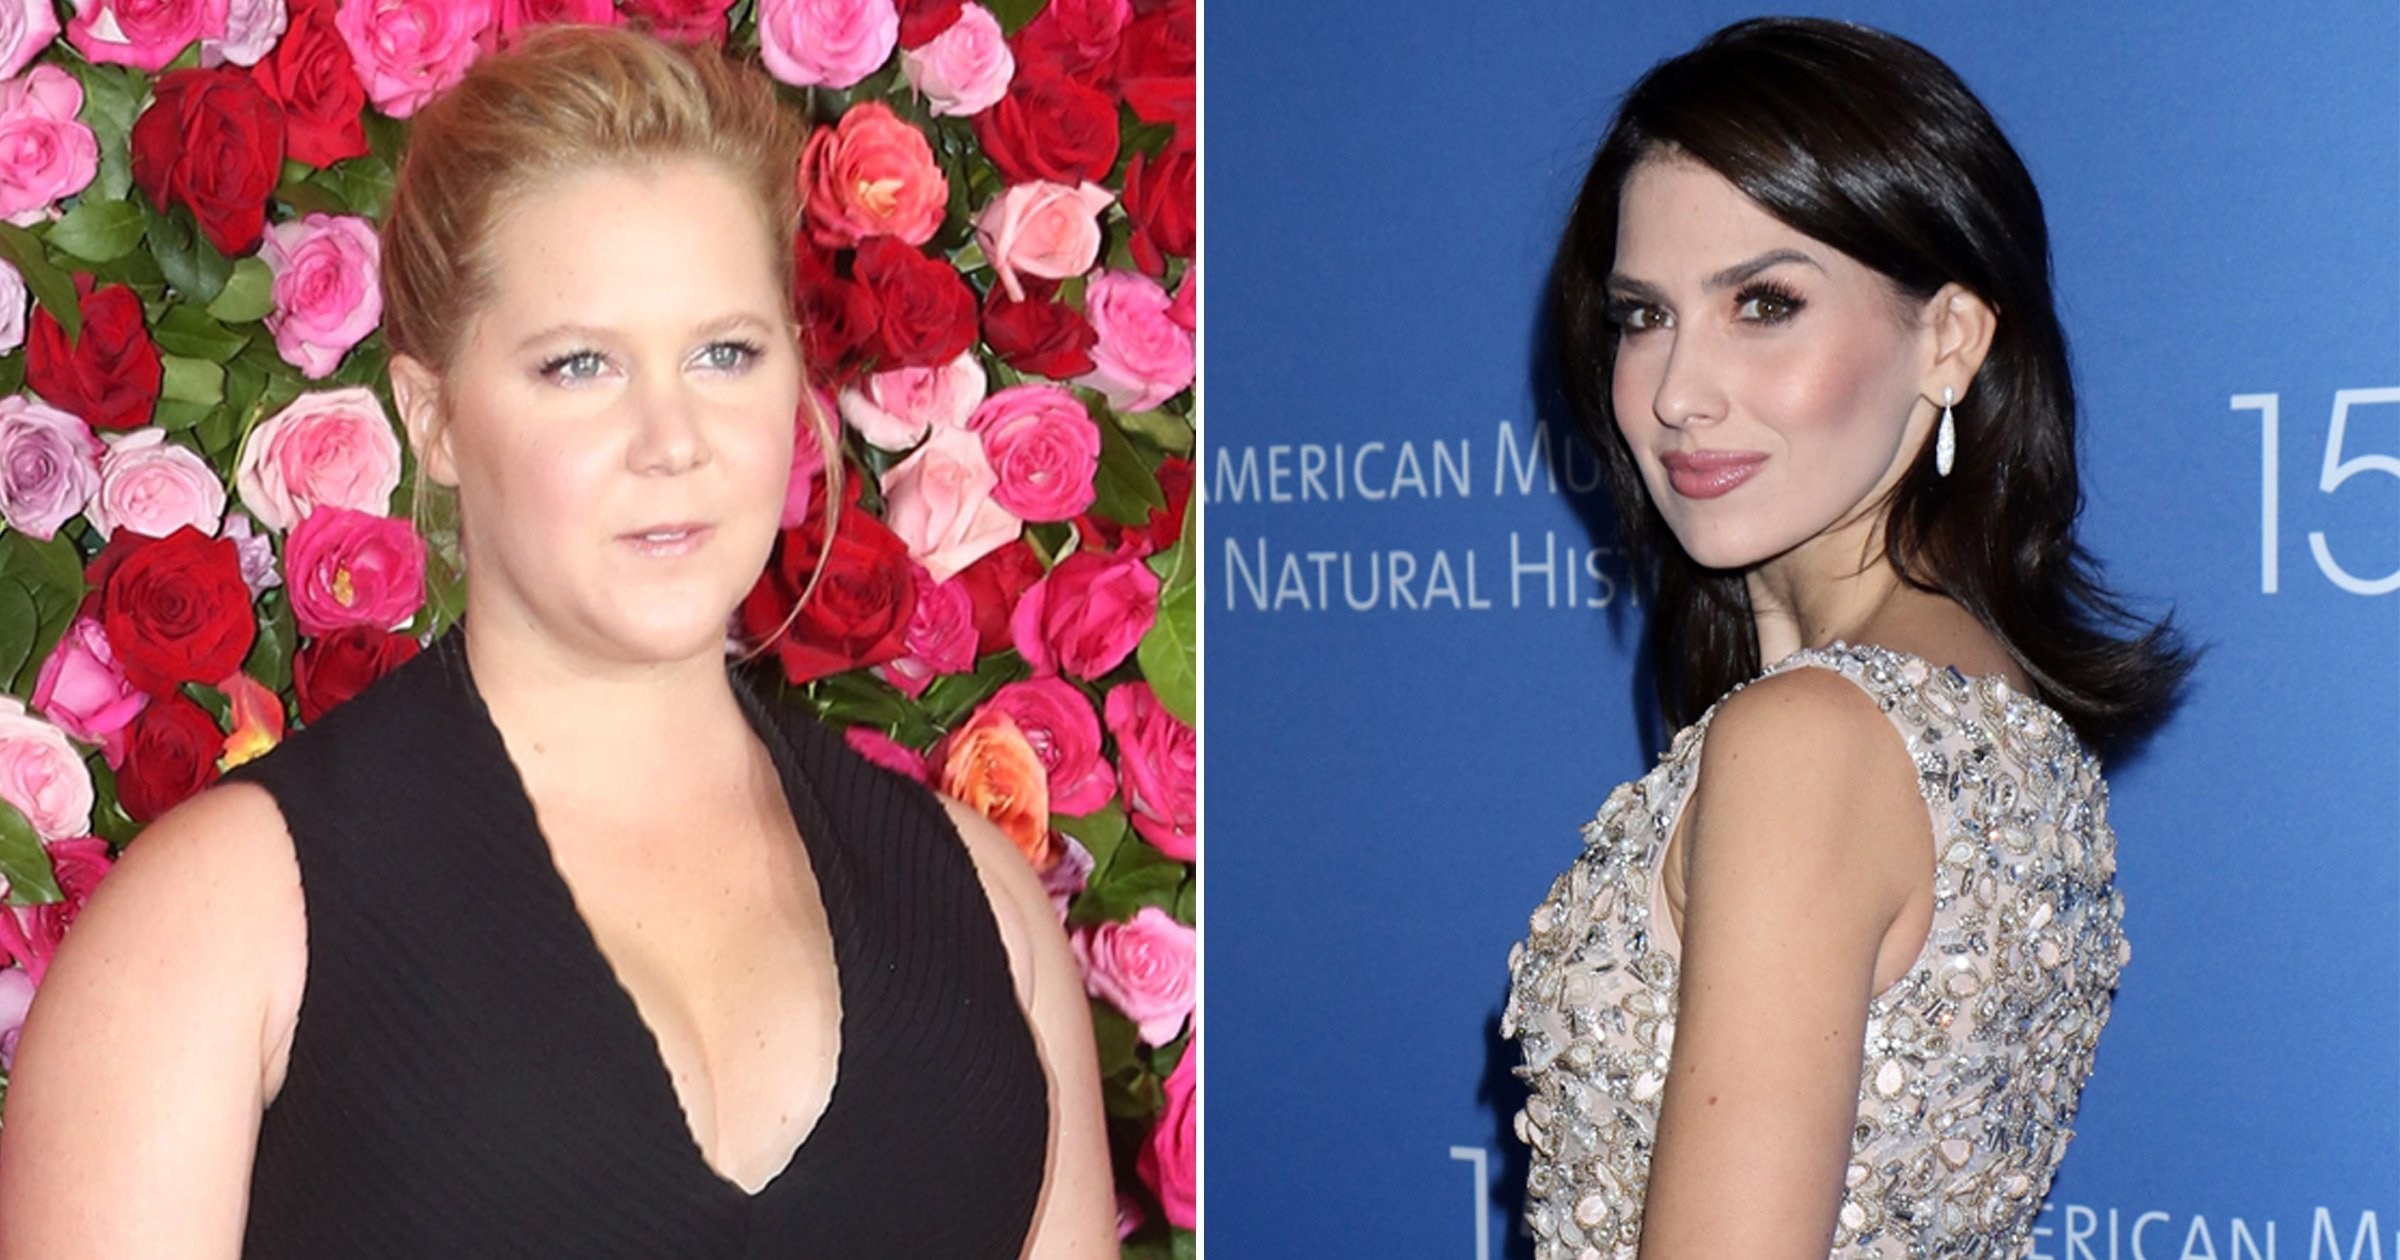 Amy Schumer weighs in on Hilaria Baldwin Spanish controversy: ‘I hope she gets to visit Spain’